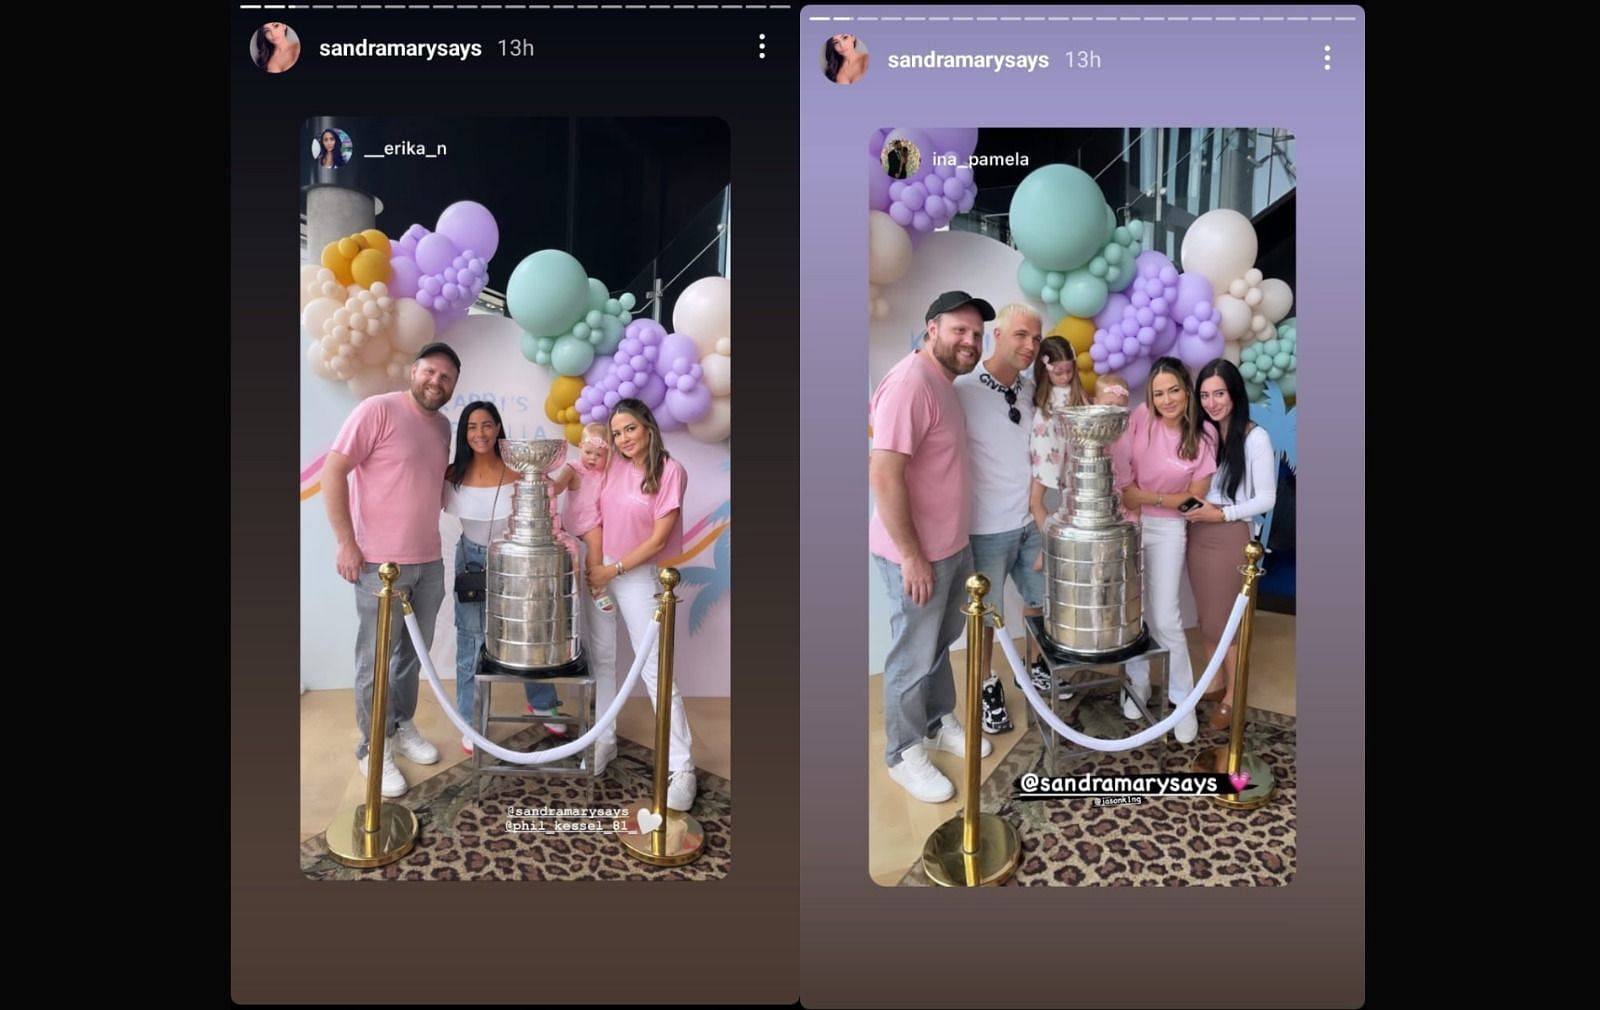 Chronicles of Stanley: Phil Kessel takes Cup to Toronto children's hospital